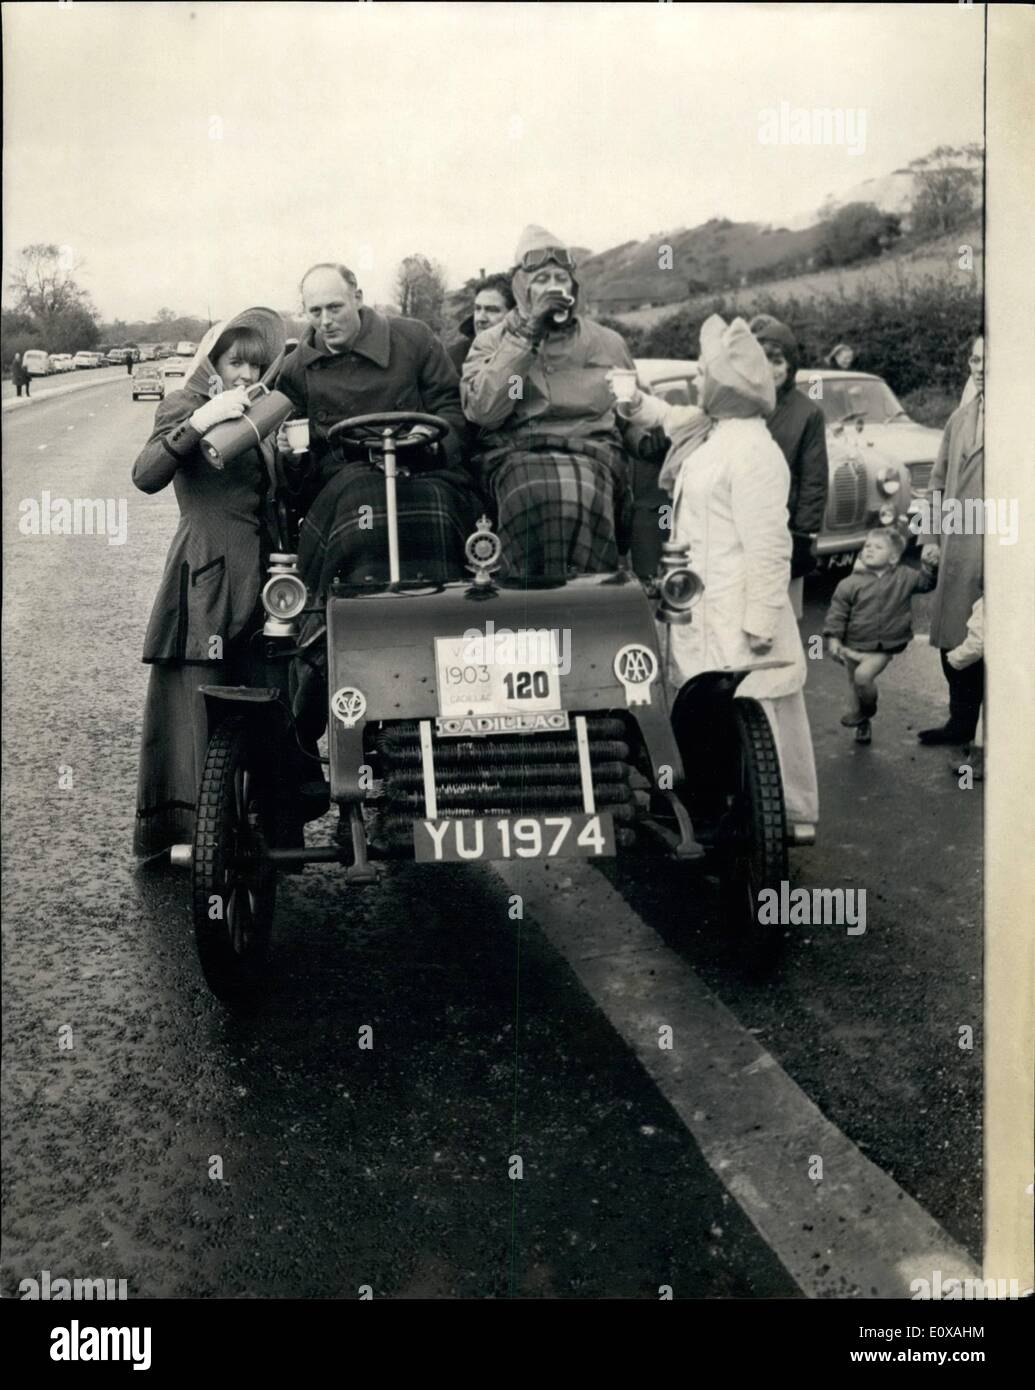 Nov. 11, 1965 - VETERAN CAR RUN FROM LONDON TO BRIGHTON DRIVERE SERVED WITH HOT DRINKING CHOCOLATE EN-ROUTE 250 Veteran cars were entered for the annual Royal Automobile Club, Veteran Car Run from London to Brighton, starting from Ryde Park this morning. Befitting the seccasion, girls dressed in period costumes served hot chocolate drinks from a veteran truck on a lap-by, near Pyscombe, seven miles from Brighton. PHOTO SHOWS LORD MONTAGUE of Beaulleu, driving a 1903 CADILLAC' gets a drink of hot chocolate from SARAH QUENMELL, dressed in period *costume on the lay-by today Stock Photo